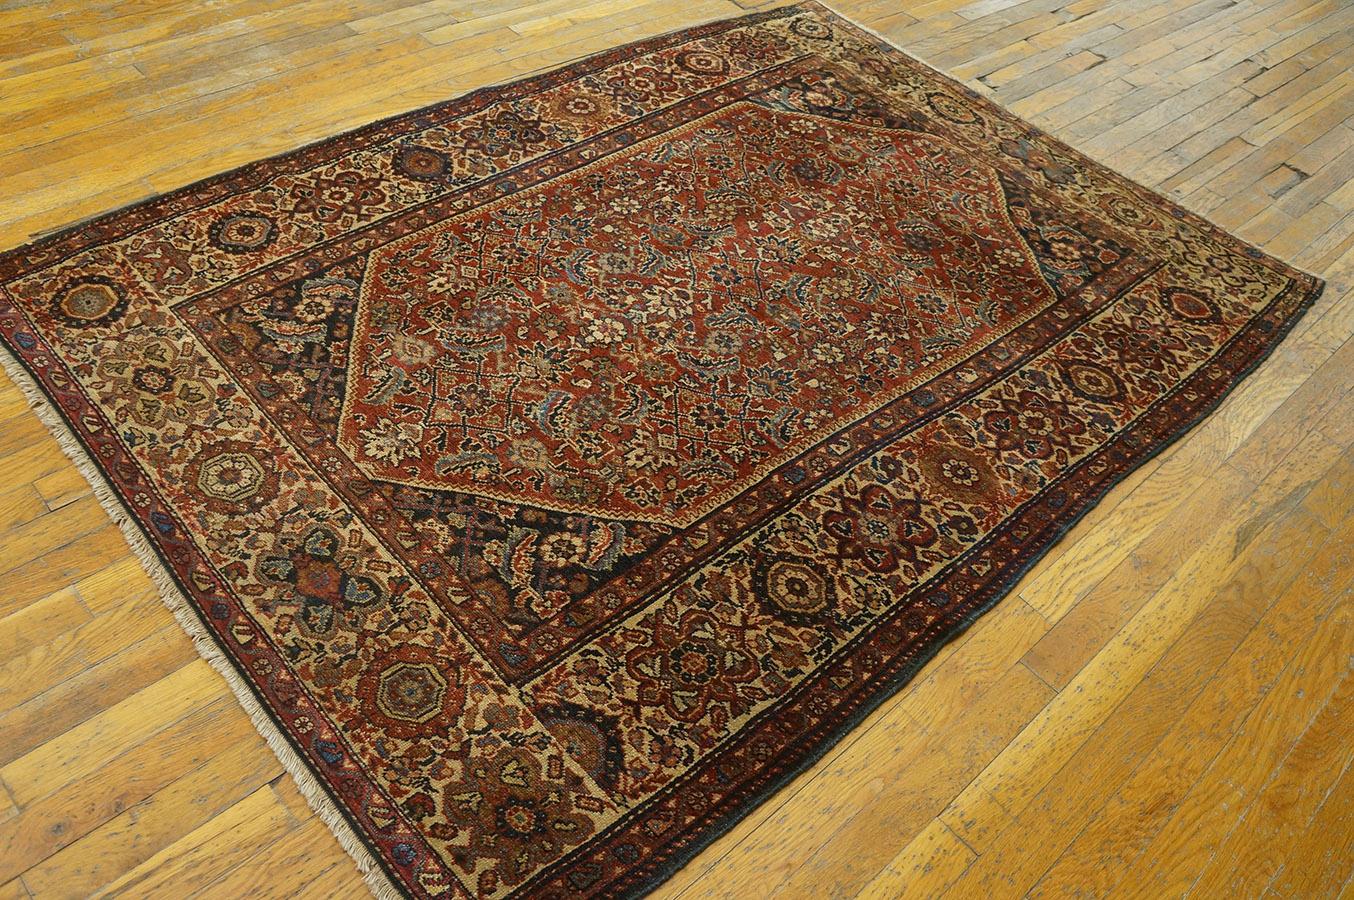 Hand-Knotted Early 20th Century Persian Malayer Carpet ( 4'3